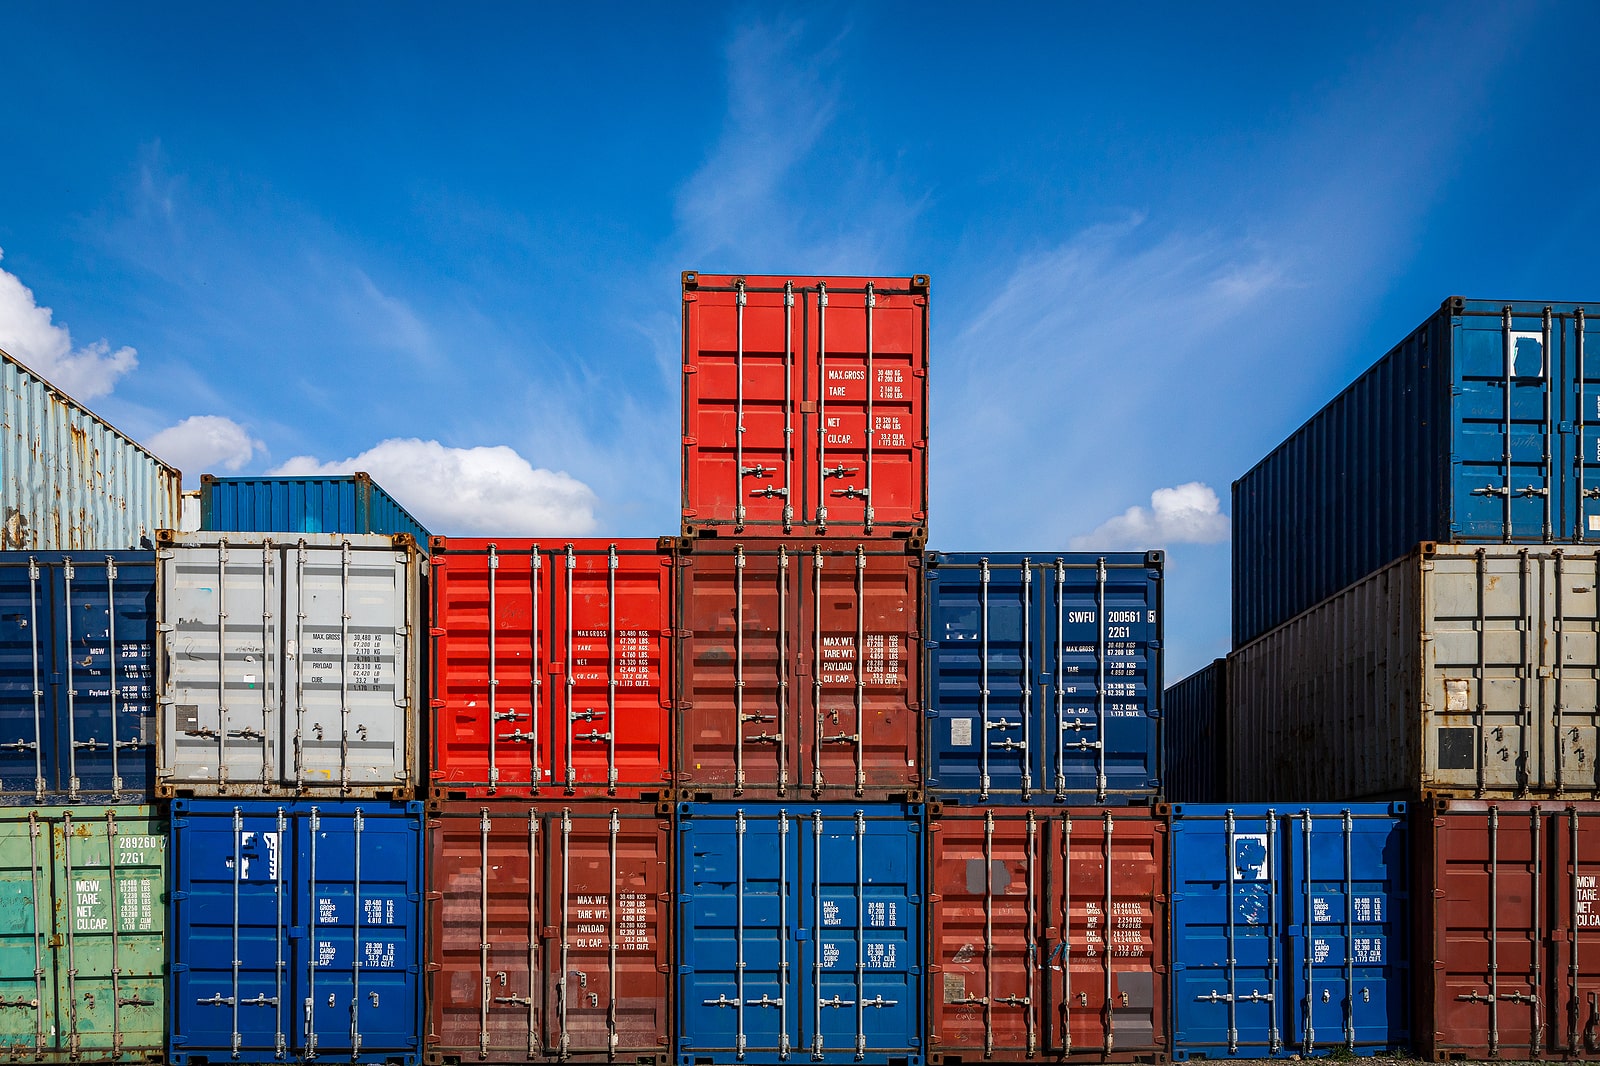 Storage containers stacked on top of each other beneath a blue sky.